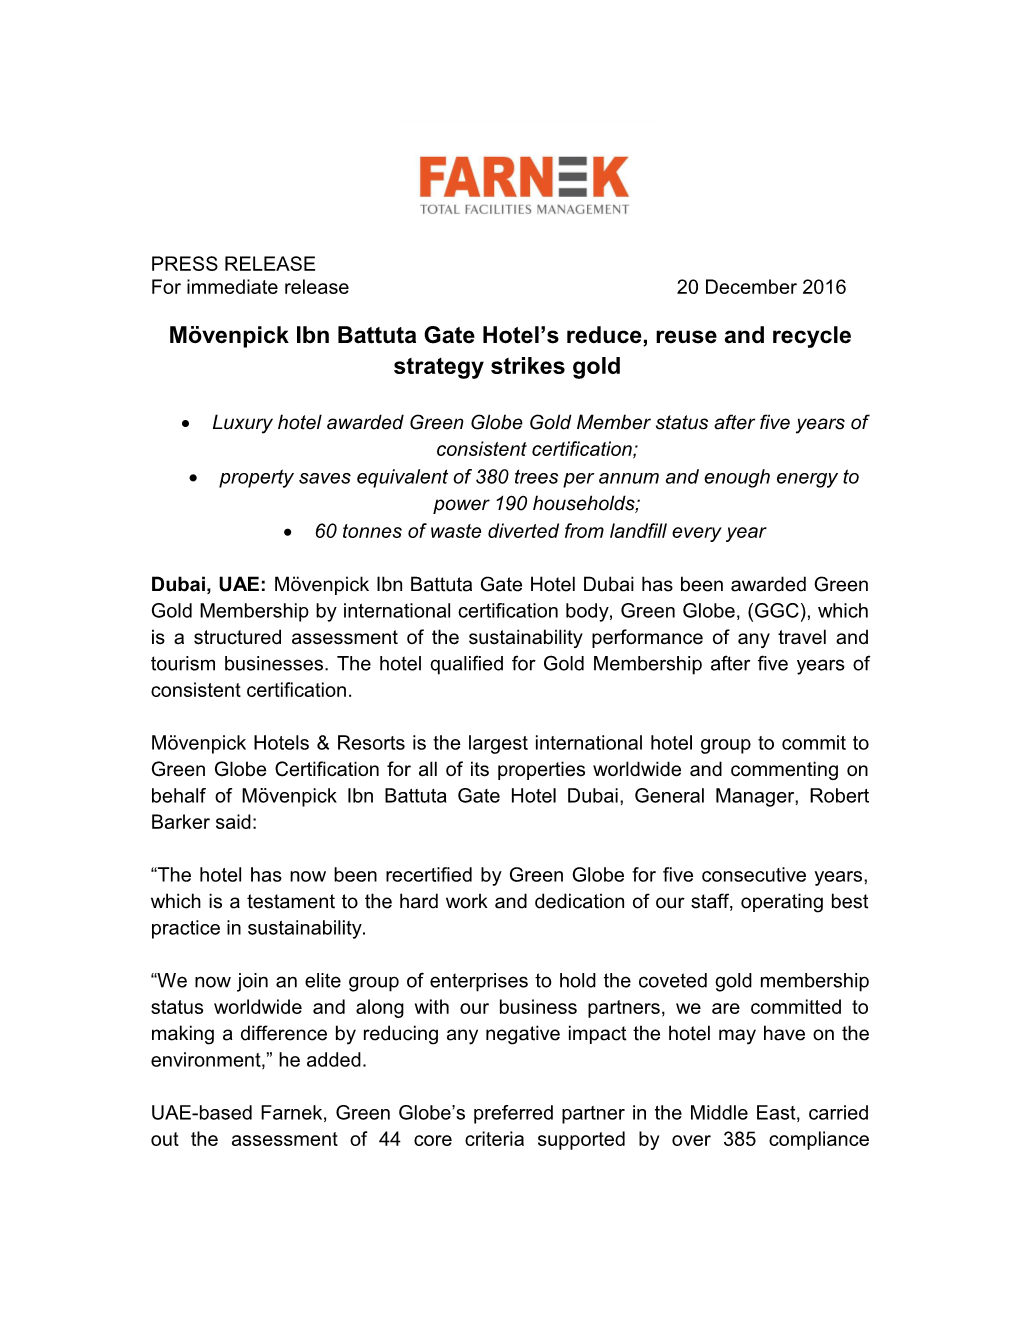 Avireal Facilitates Market Position with FARNEK Acquisition